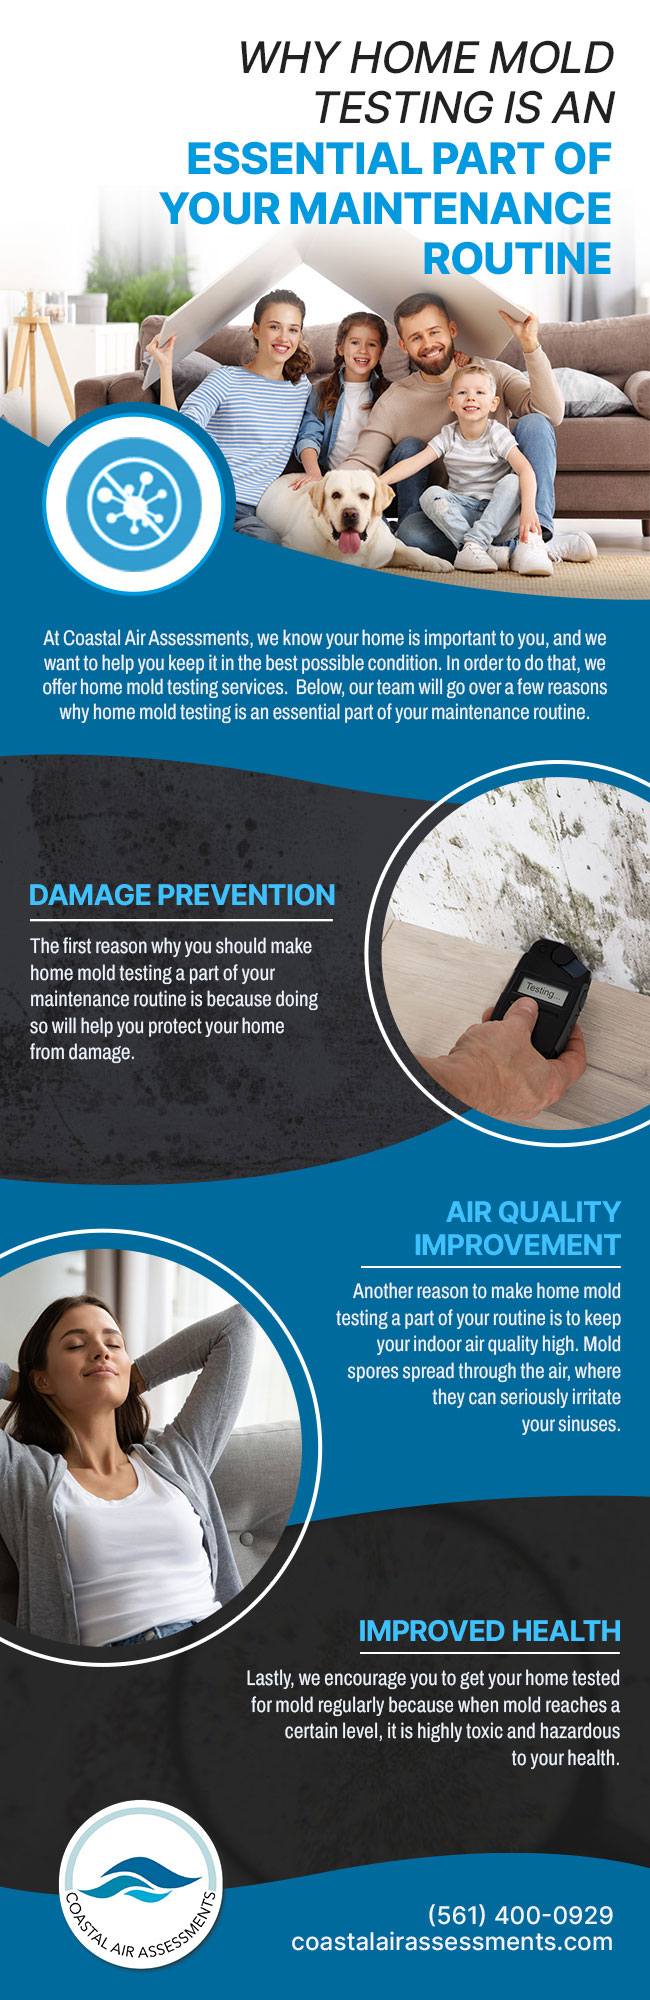 Why Home Mold Testing is an Essential Part of Your Maintenance Routine 